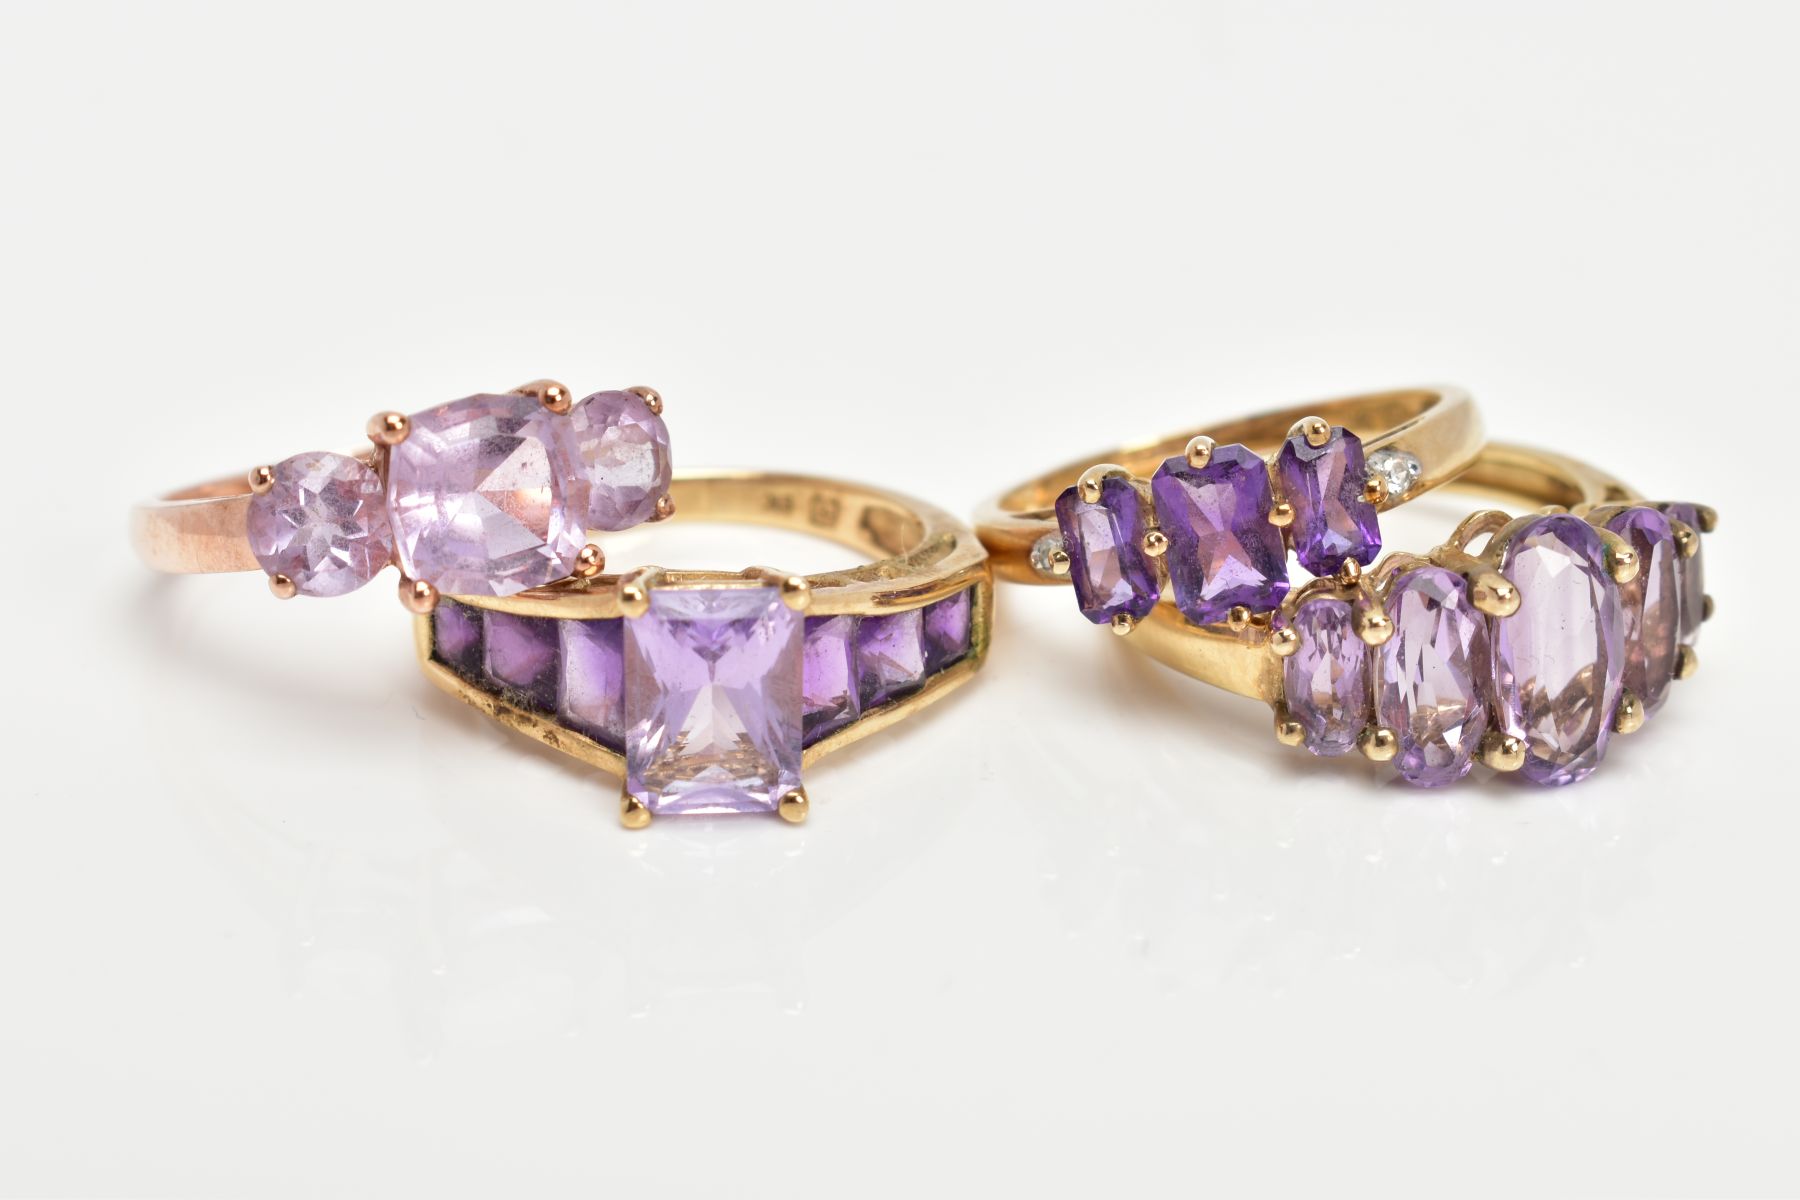 FOUR 9CT GOLD AMETHYST DRESS RINGS, three yellow gold and one rose gold, each set with vary cut